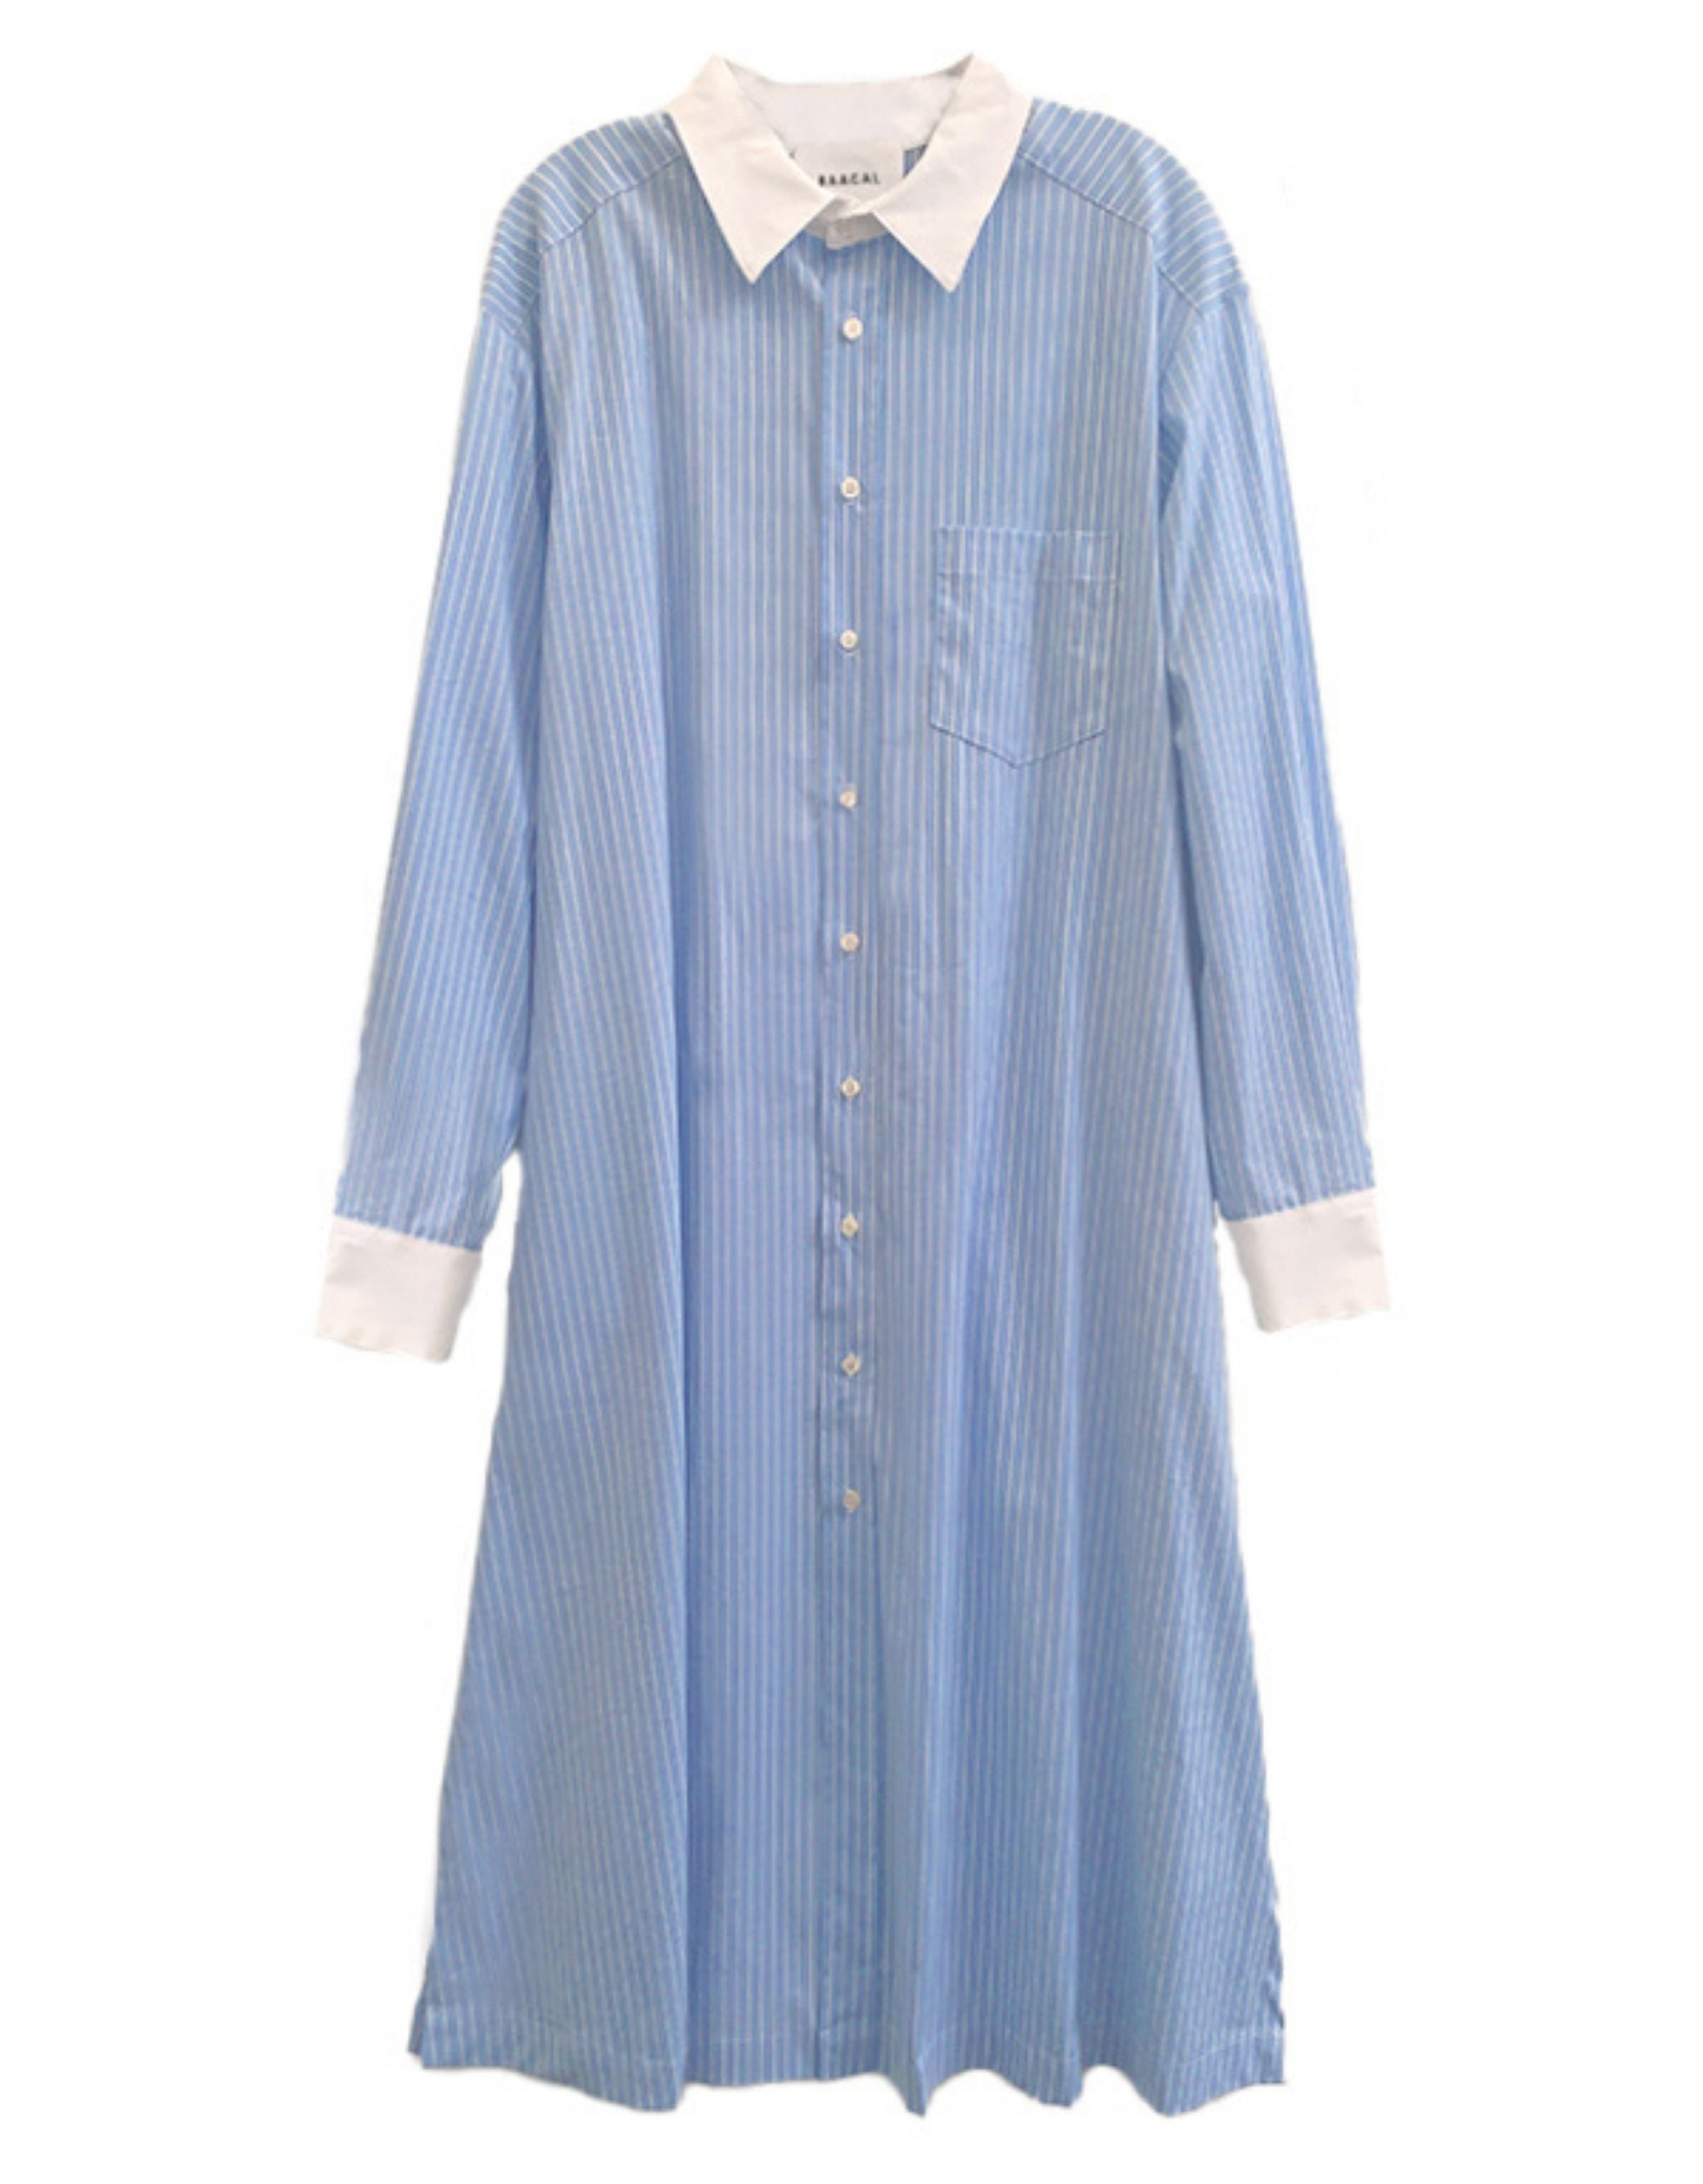 Long Cotton Plus Size button up long sleeves shirtdress in Blue and ...